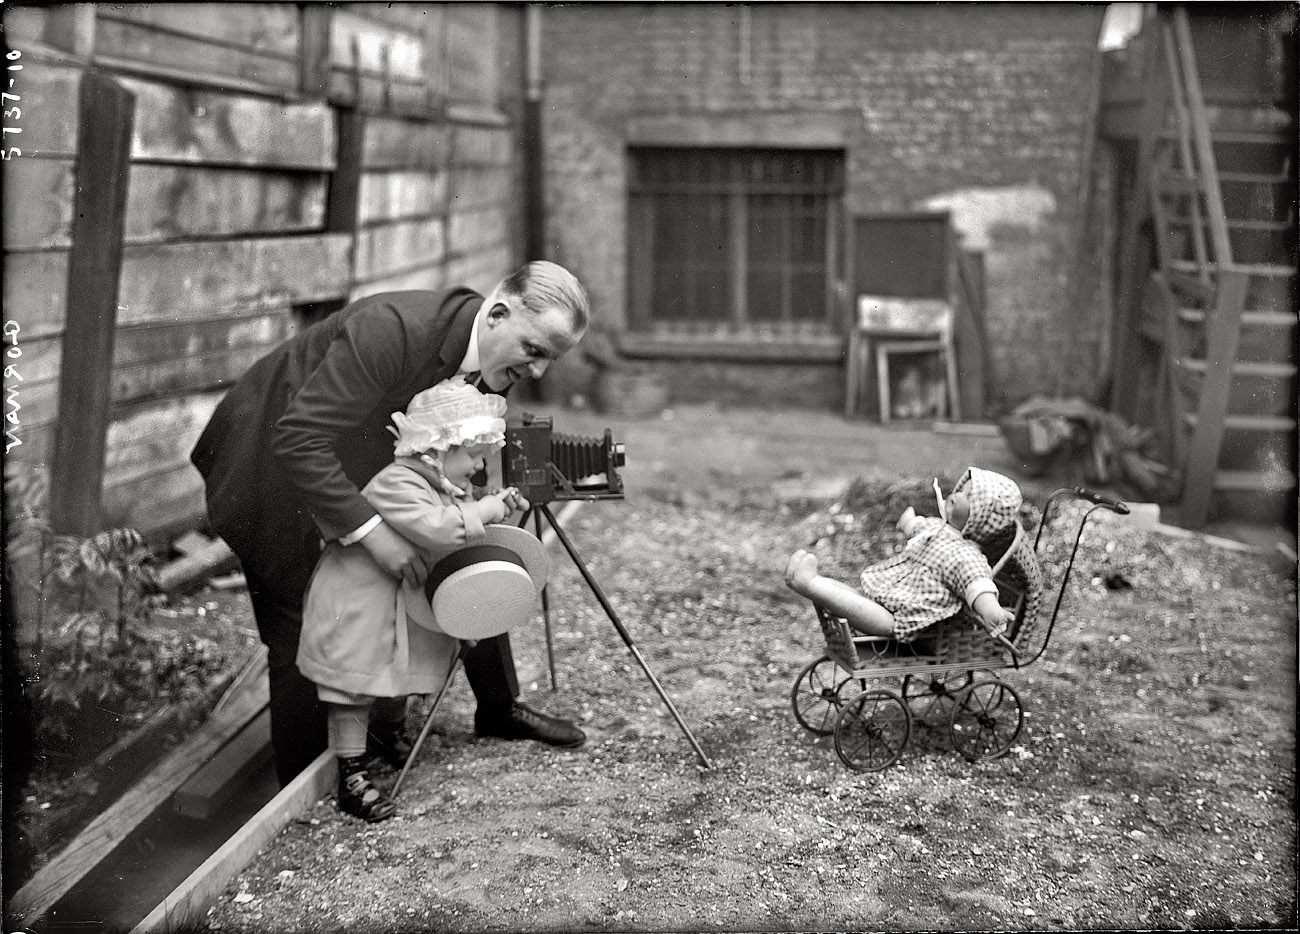 The clarinetist Ross Gorman and daughter circa 1920 in New York City. 5x7 glass negative, George Grantham Bain Collection. View full size.